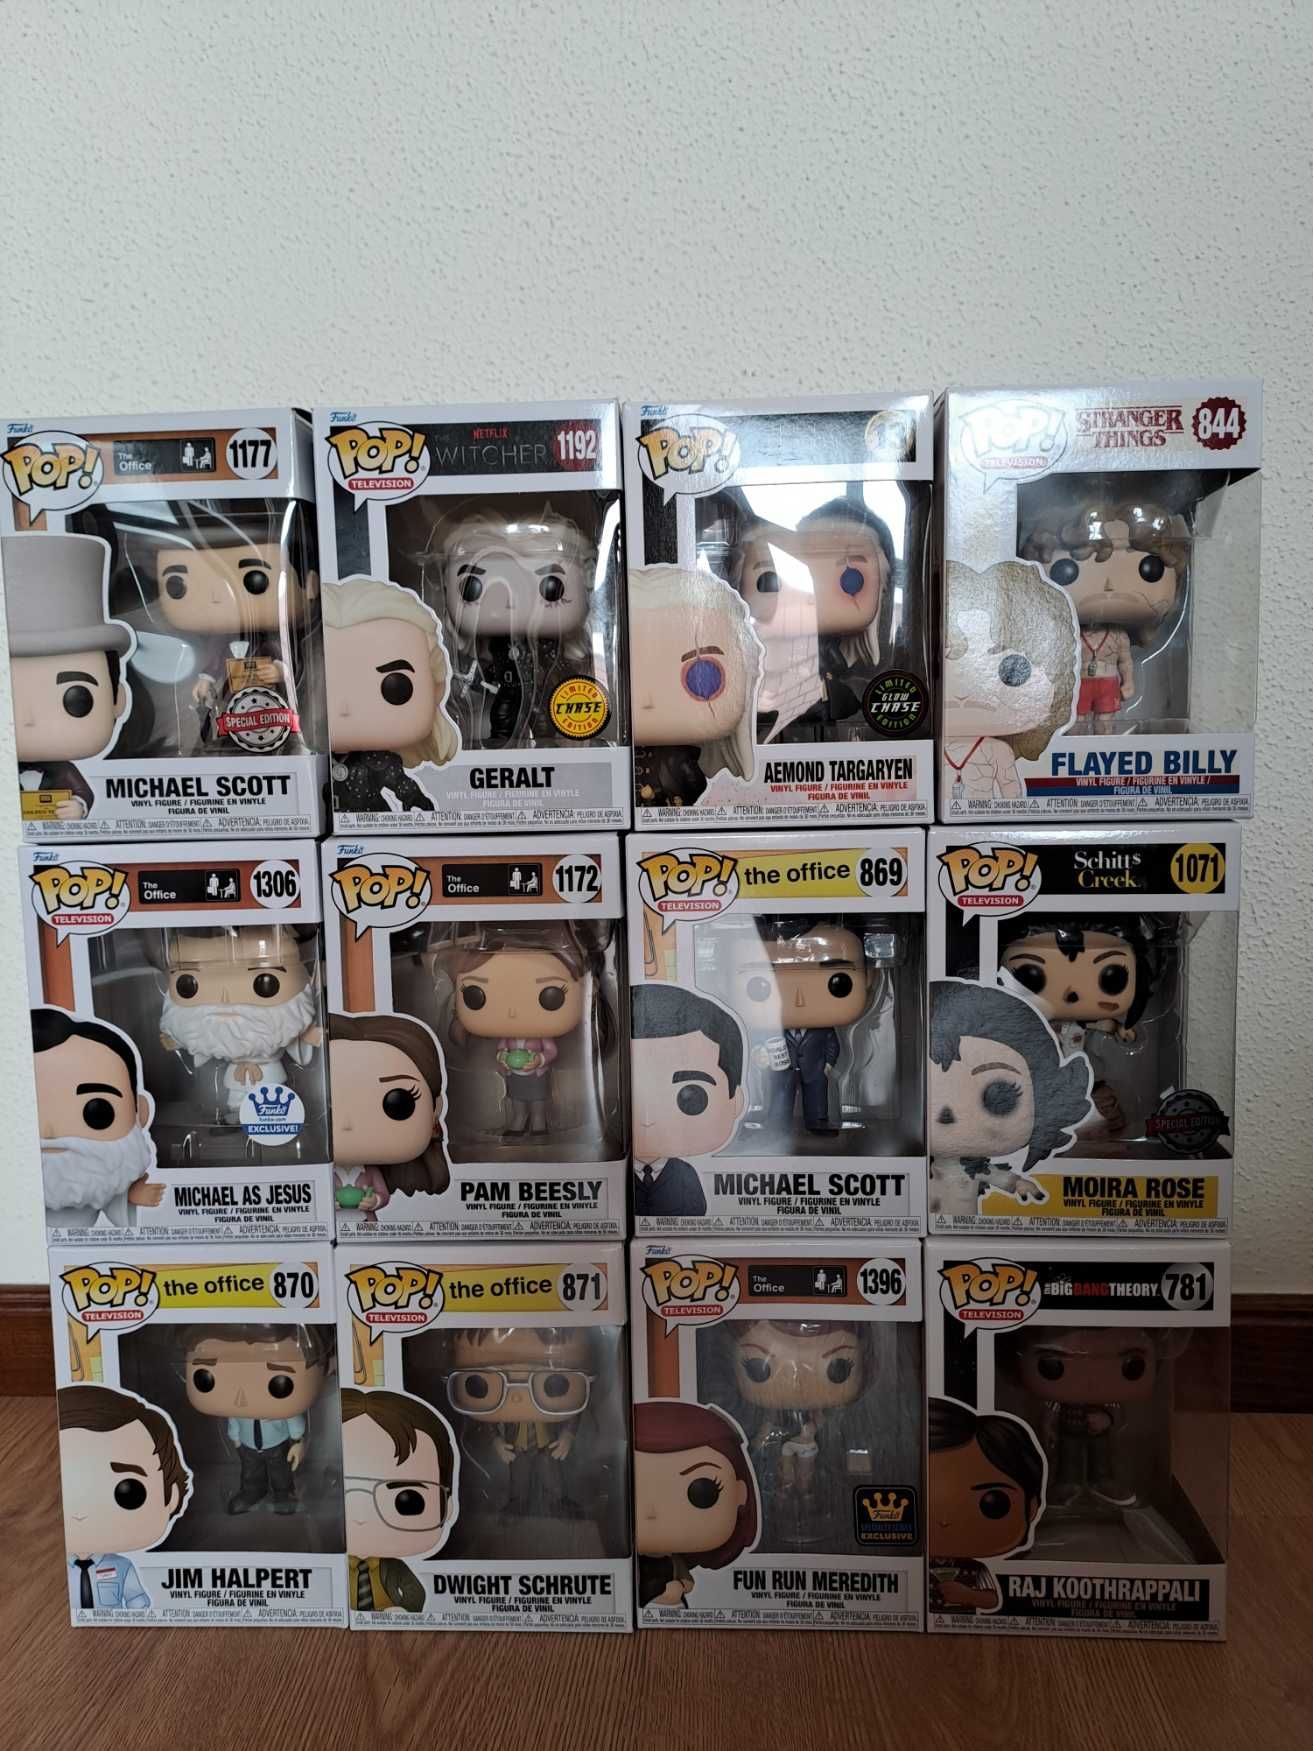 Funko pop The office the Witcher House of the Dragon big bang theory